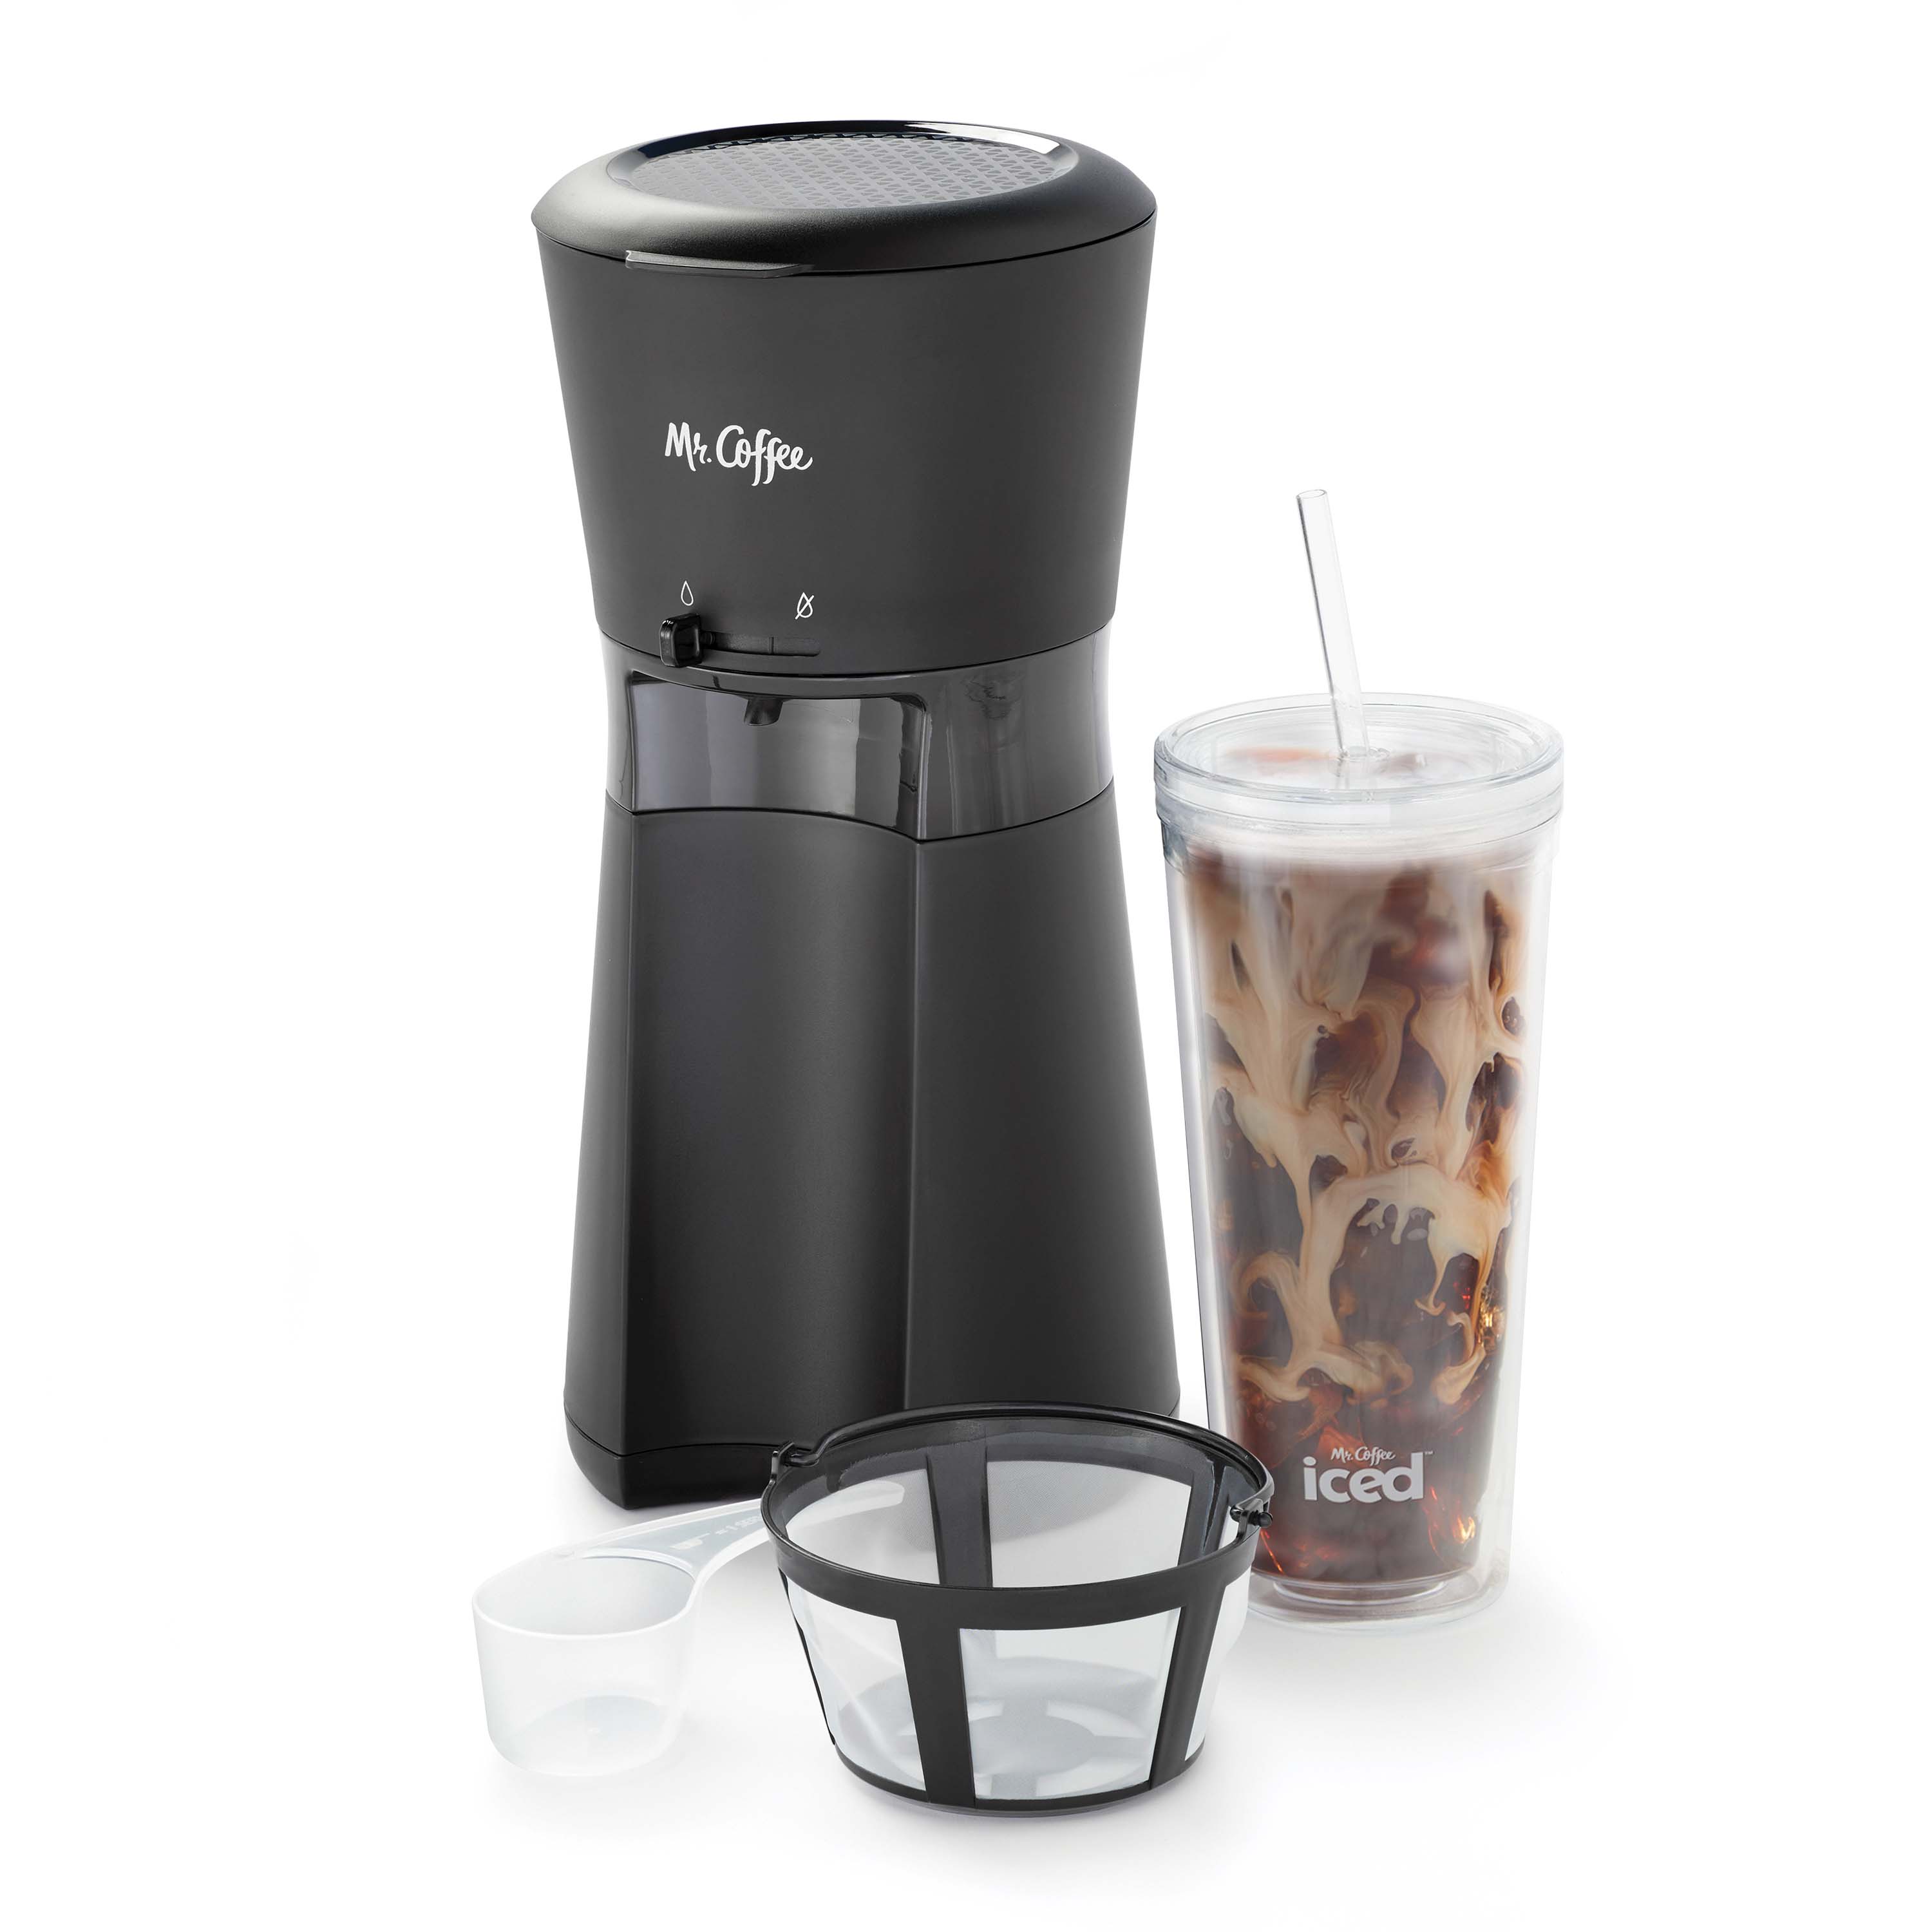 Mr. Coffee® Iced™ Coffee Maker with Reusable Tumbler and Filter, Black - image 1 of 8